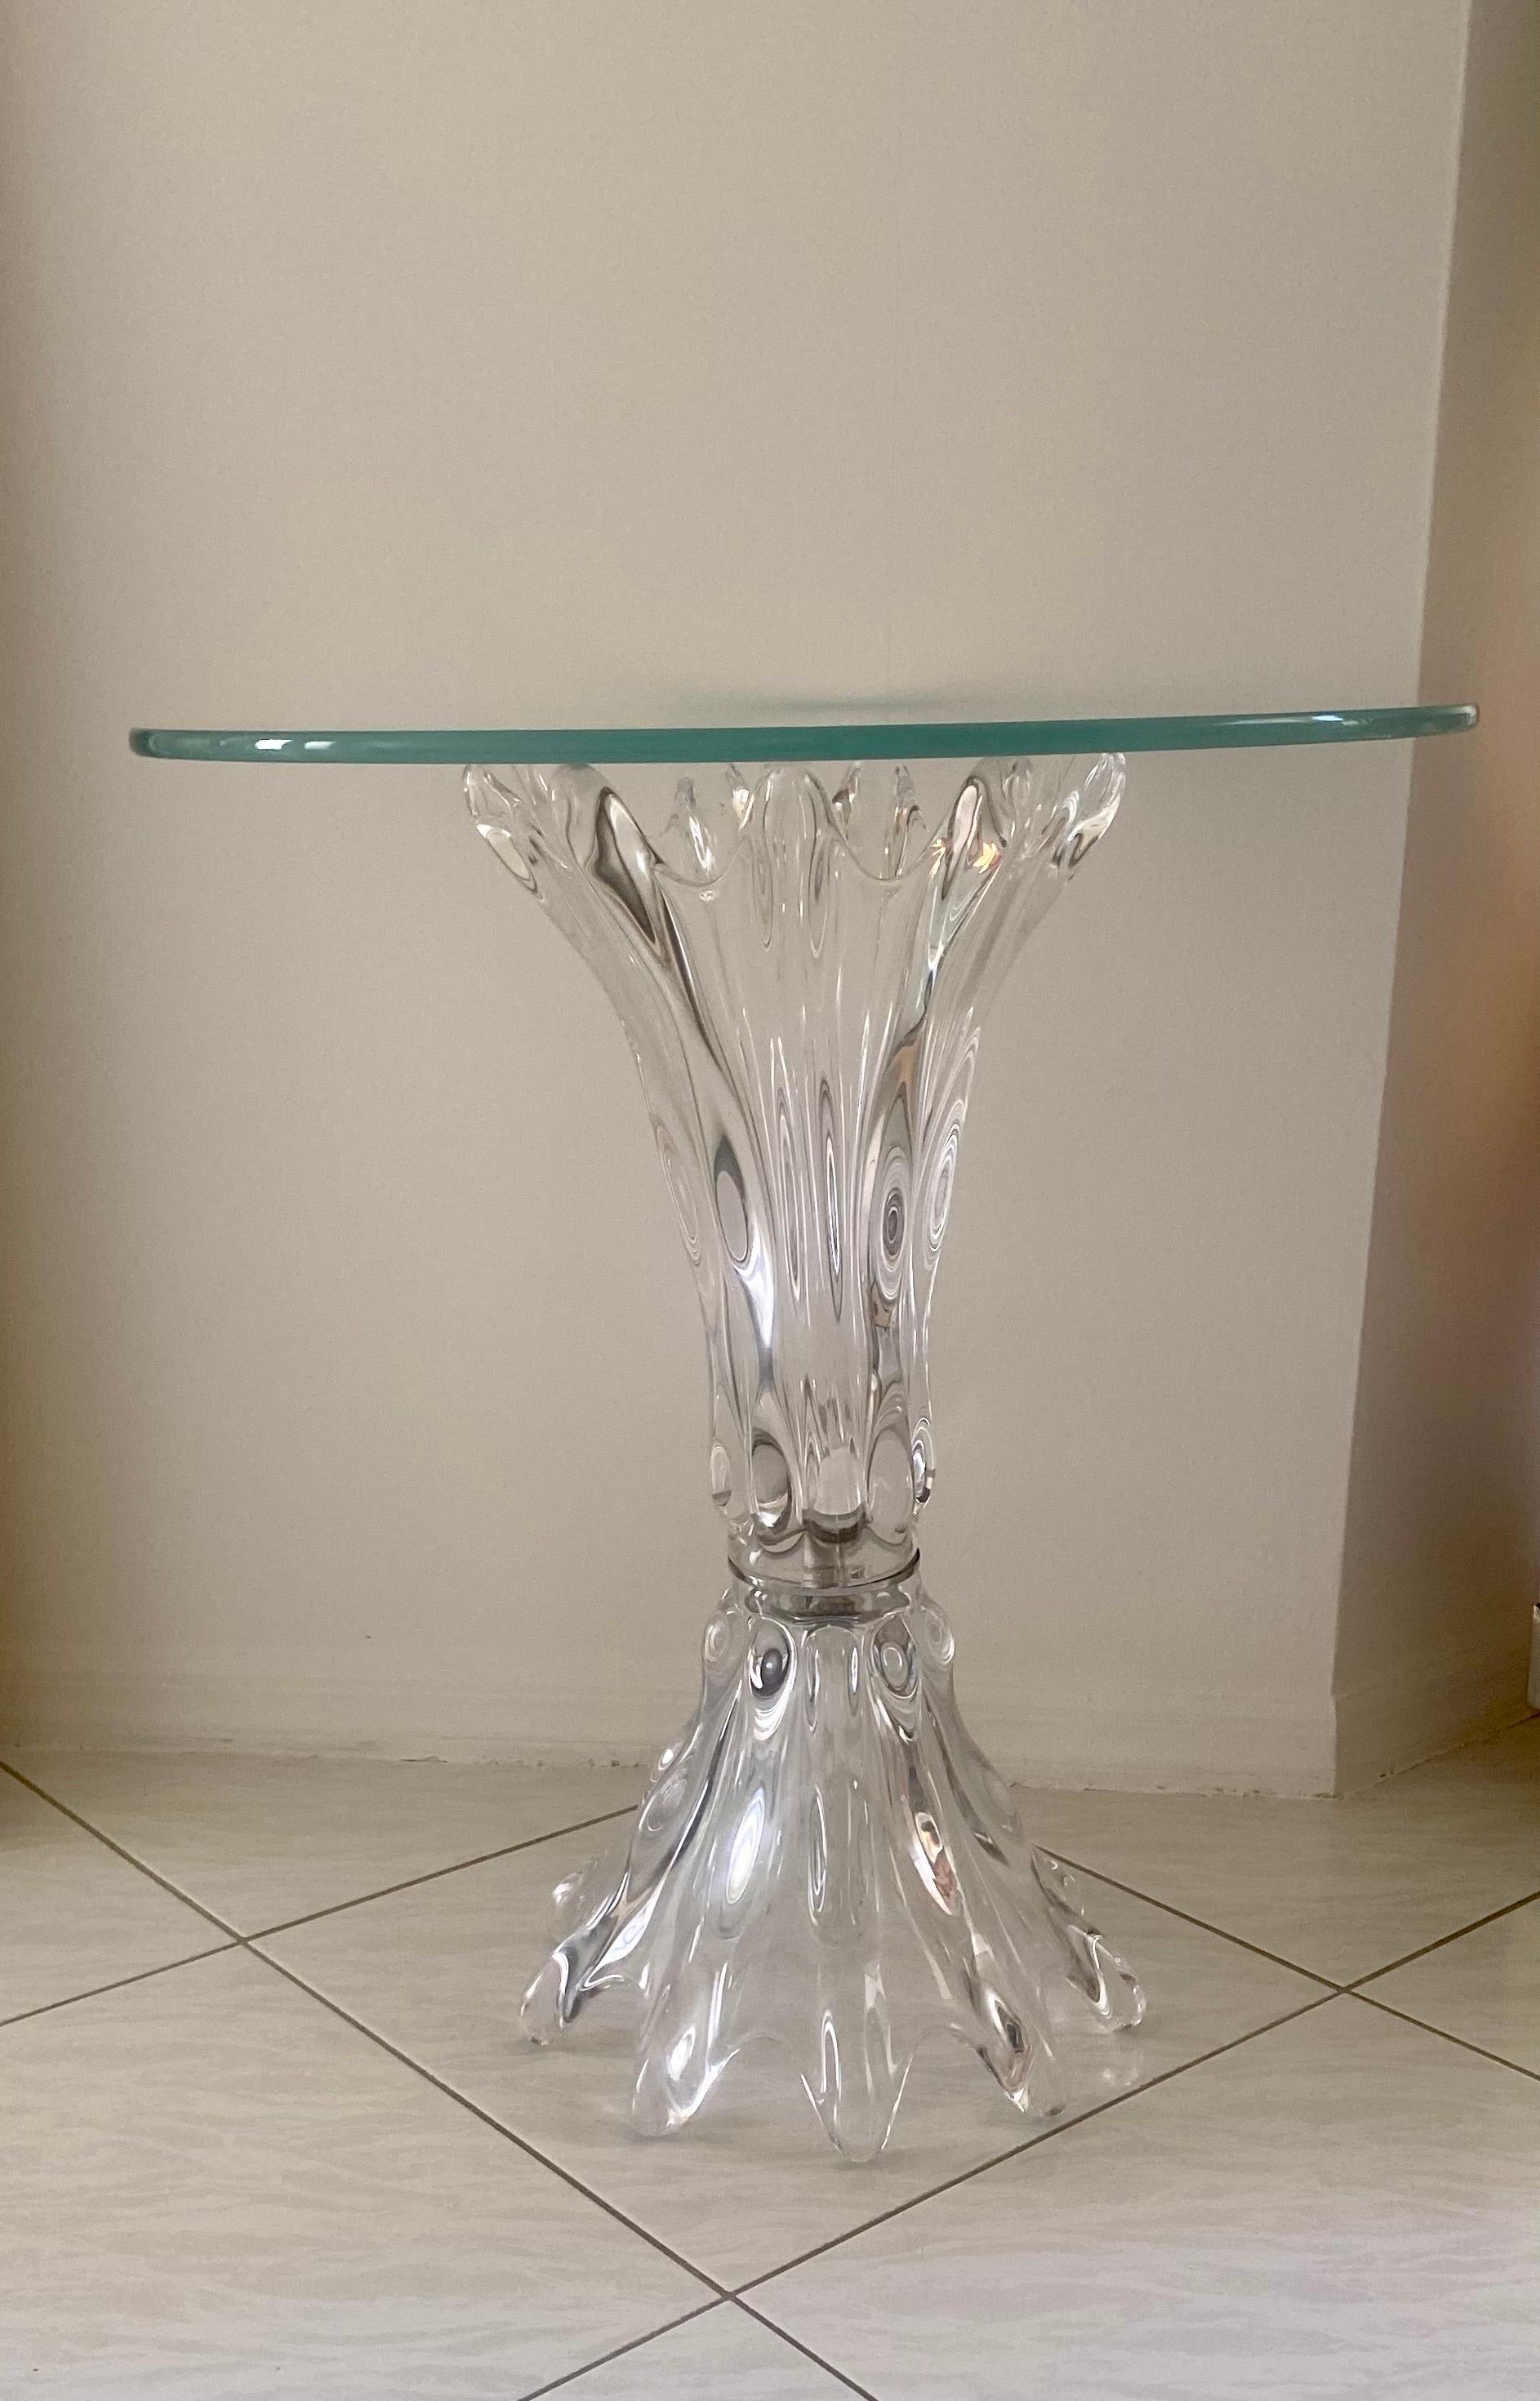 A beautiful custom made vintage crystal table base and glass top from Vannes, France. Two large crystal glass sculptural pieces are connected with a nickeled wafer and hidden bolt. The table is in very good condition and quite breathtaking.